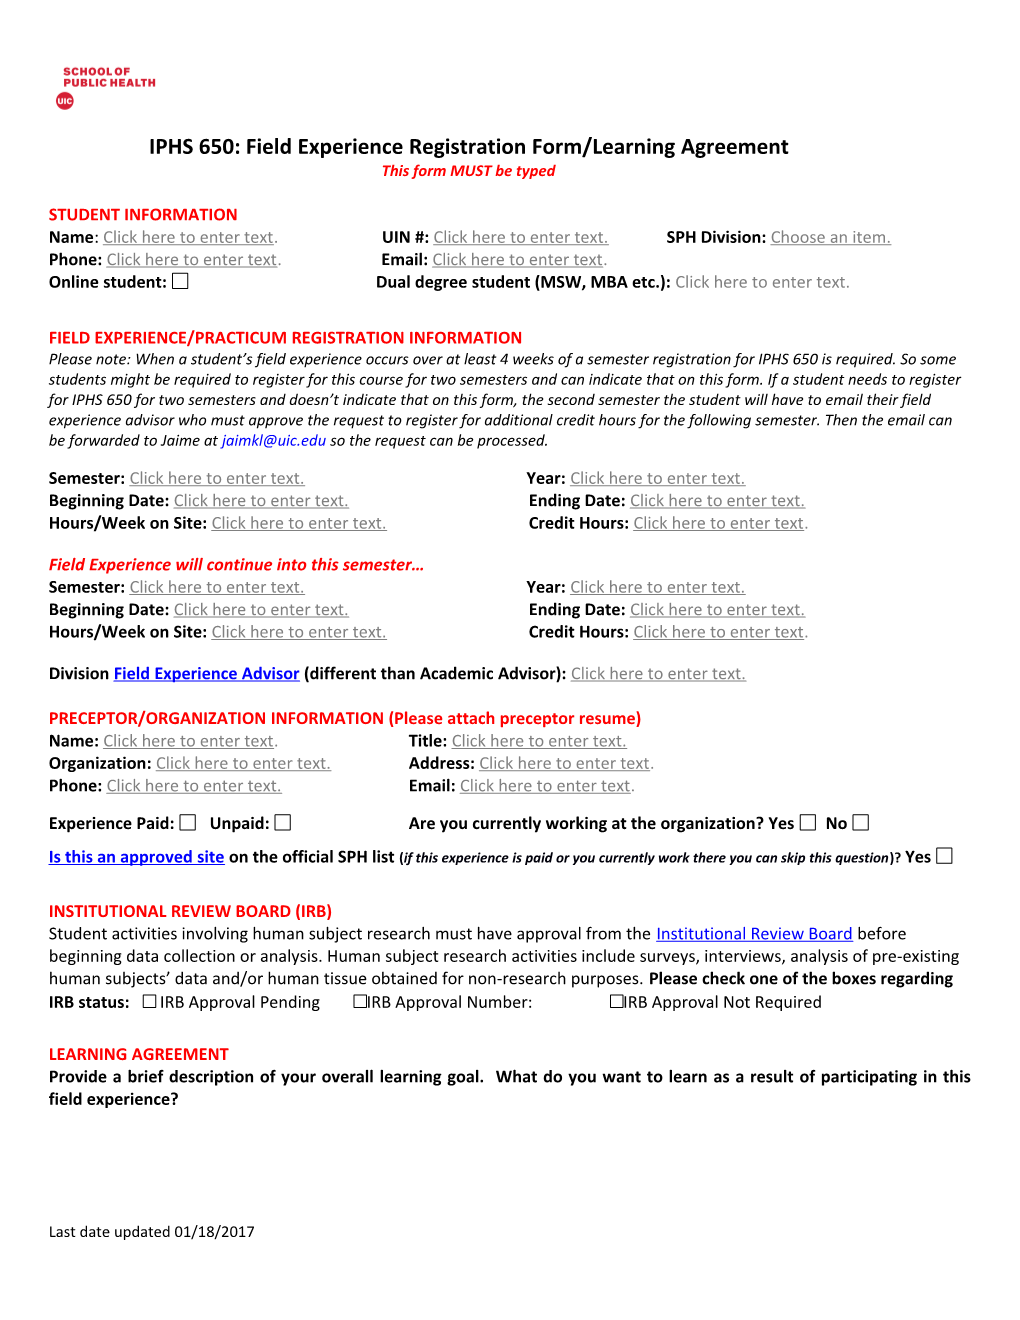 IPHS 650: Field Experienceregistration Form/Learning Agreement